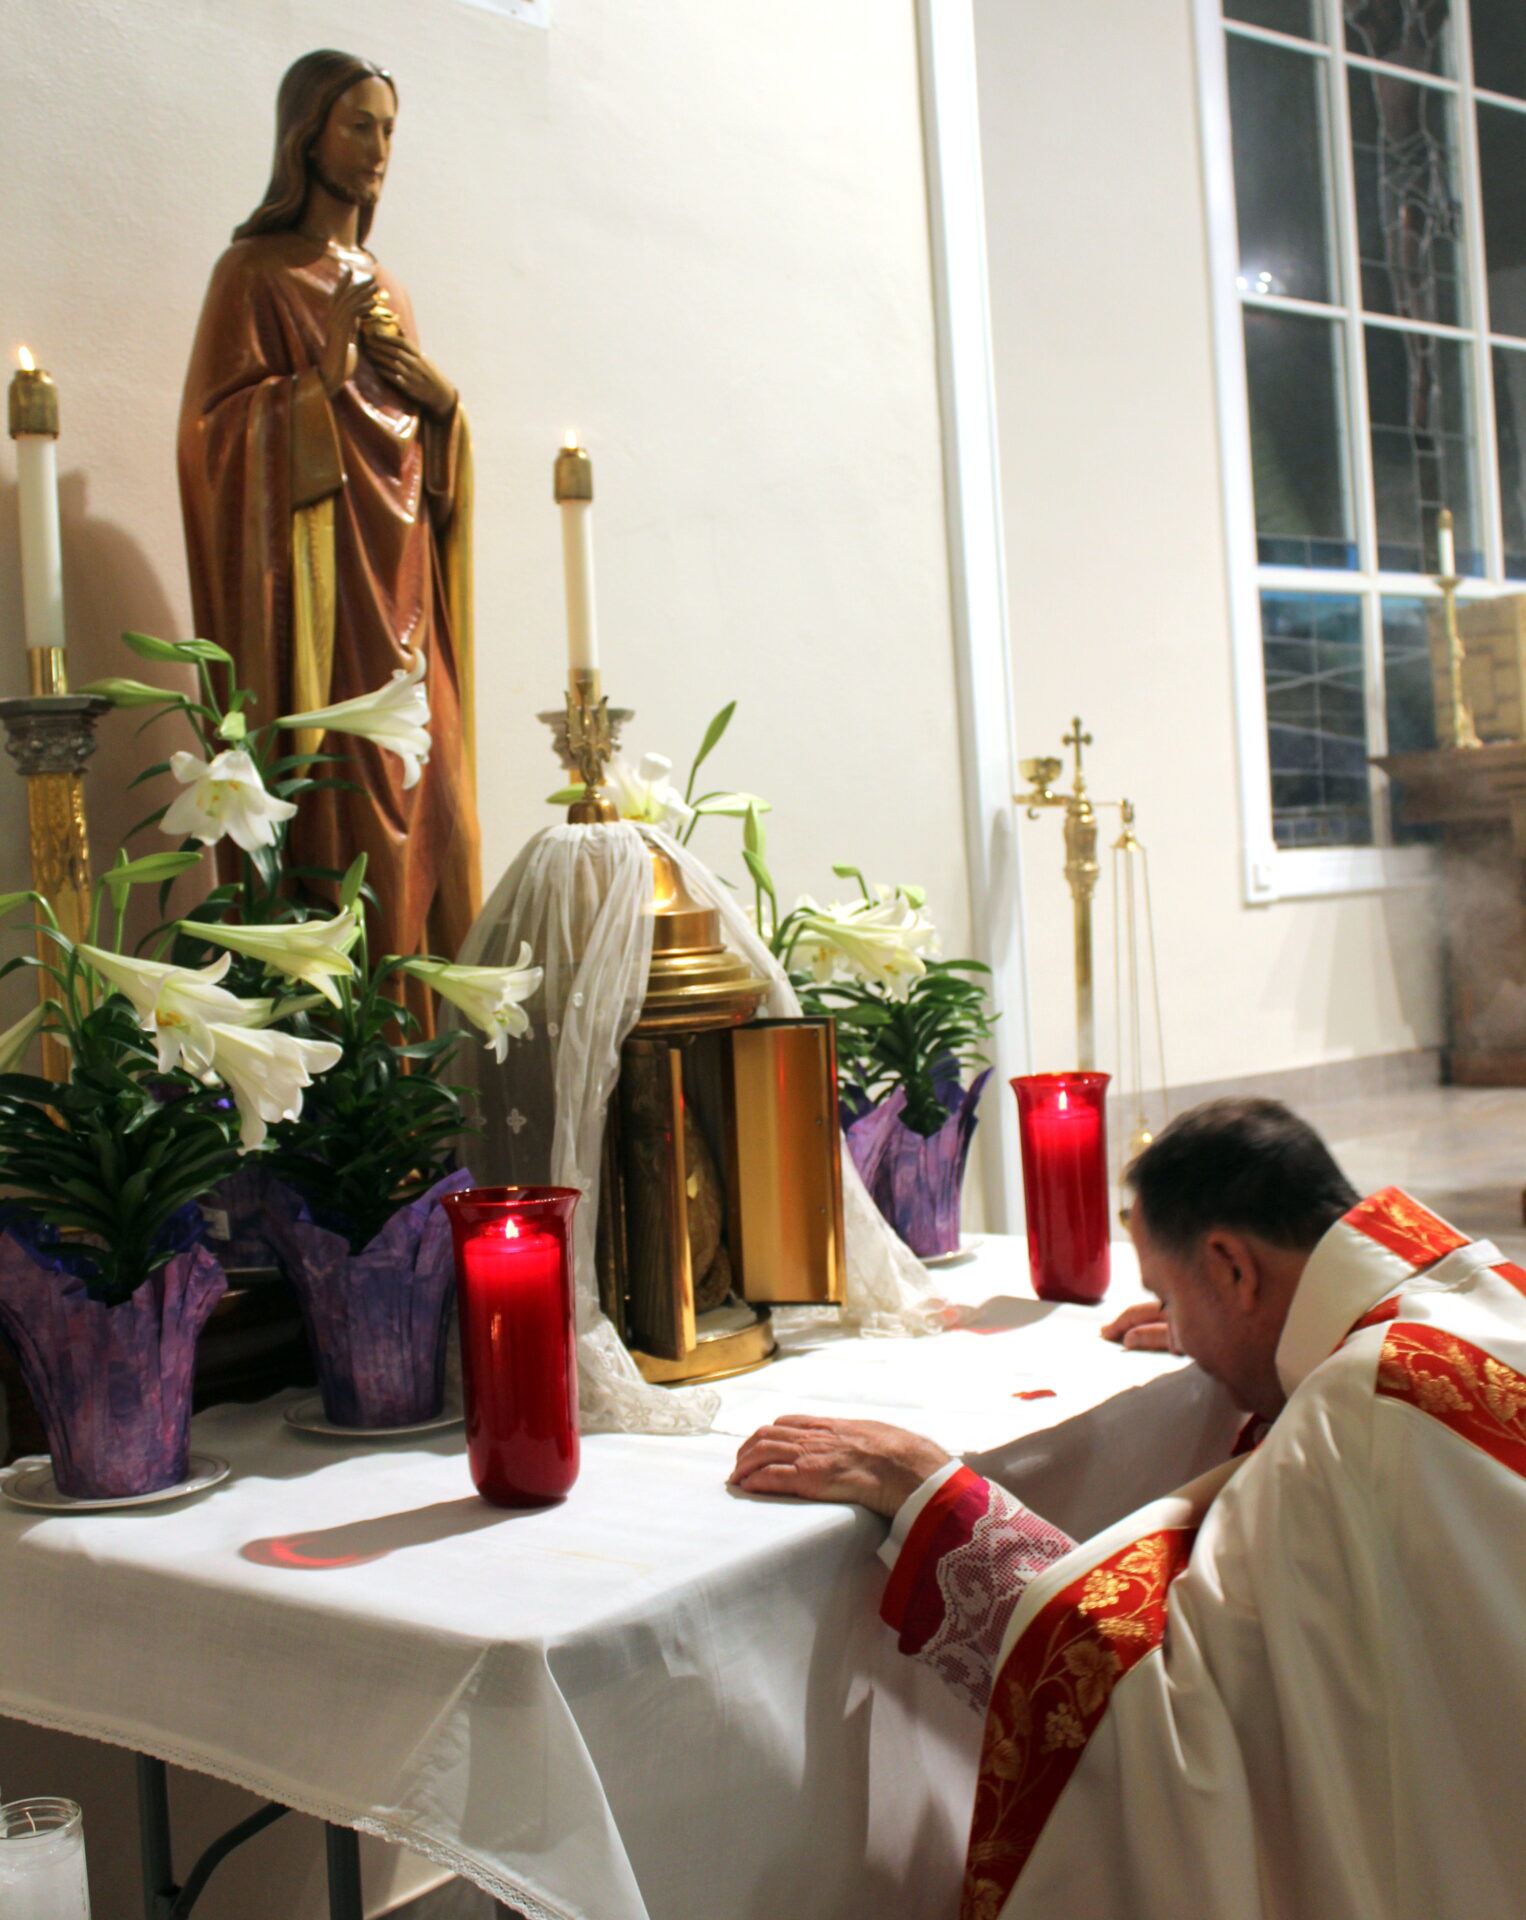 The priest kneeling down in front of the altar with two red candles